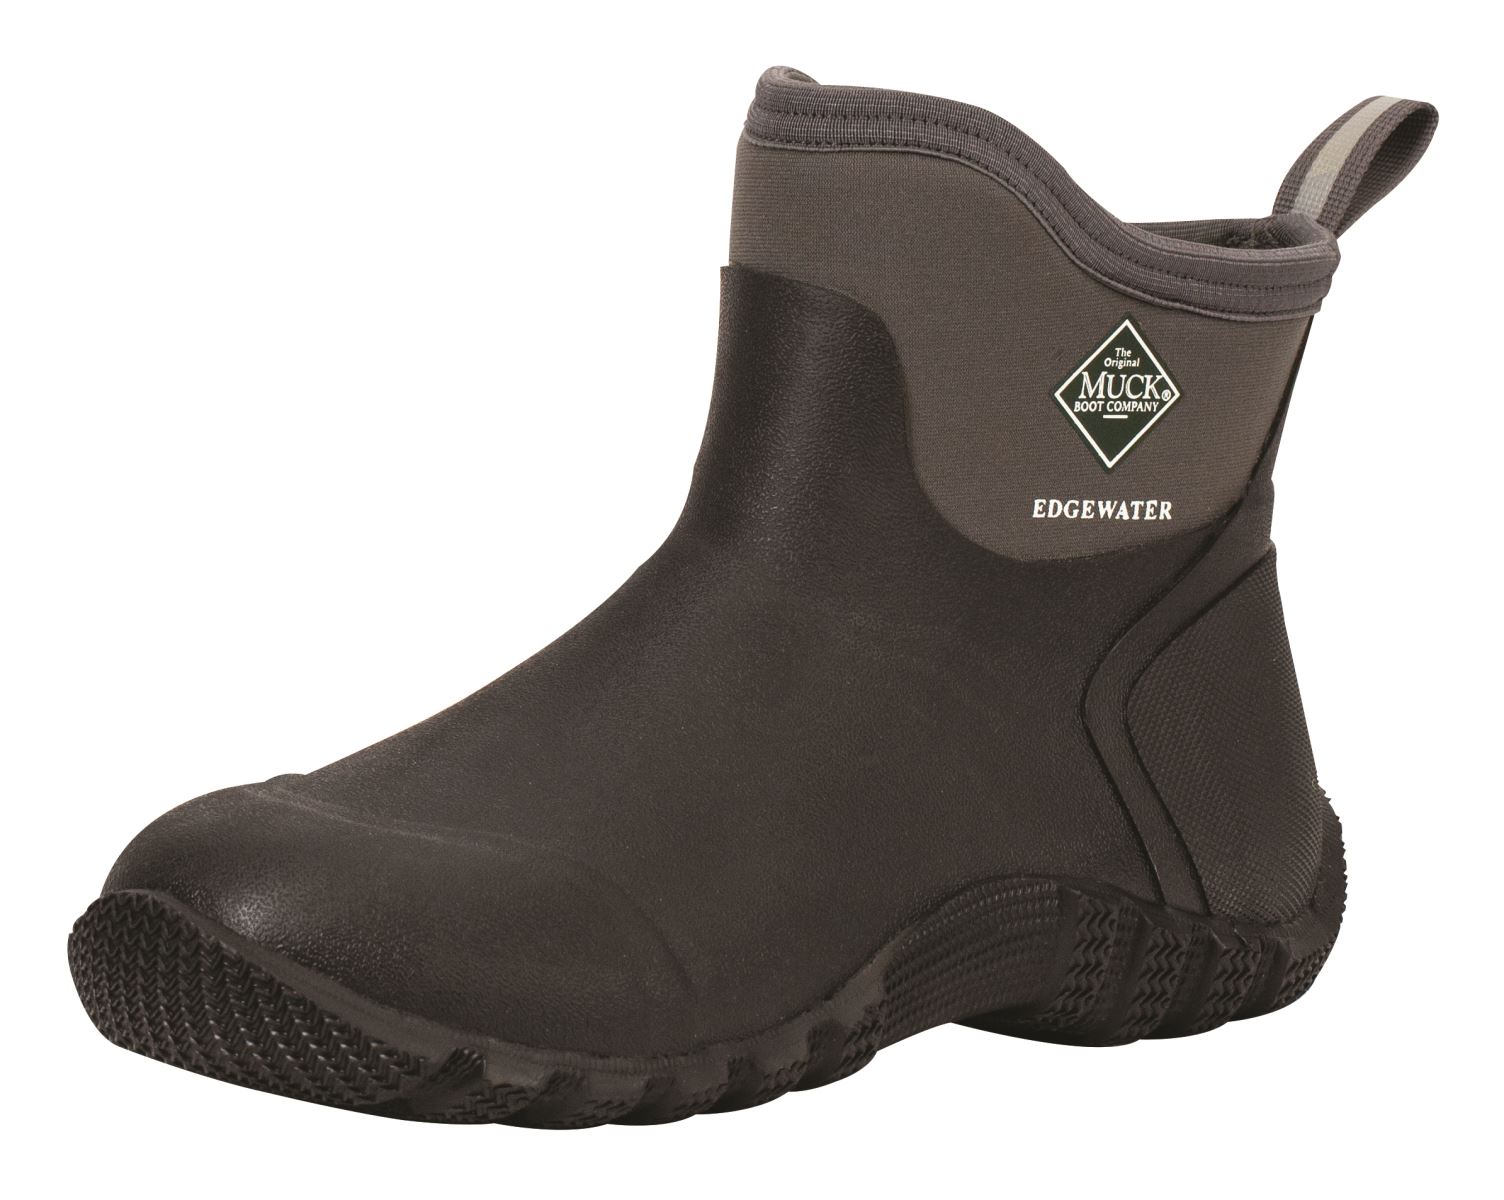 The Original Muck Boot Company Edgewater Classic Ankle Boot